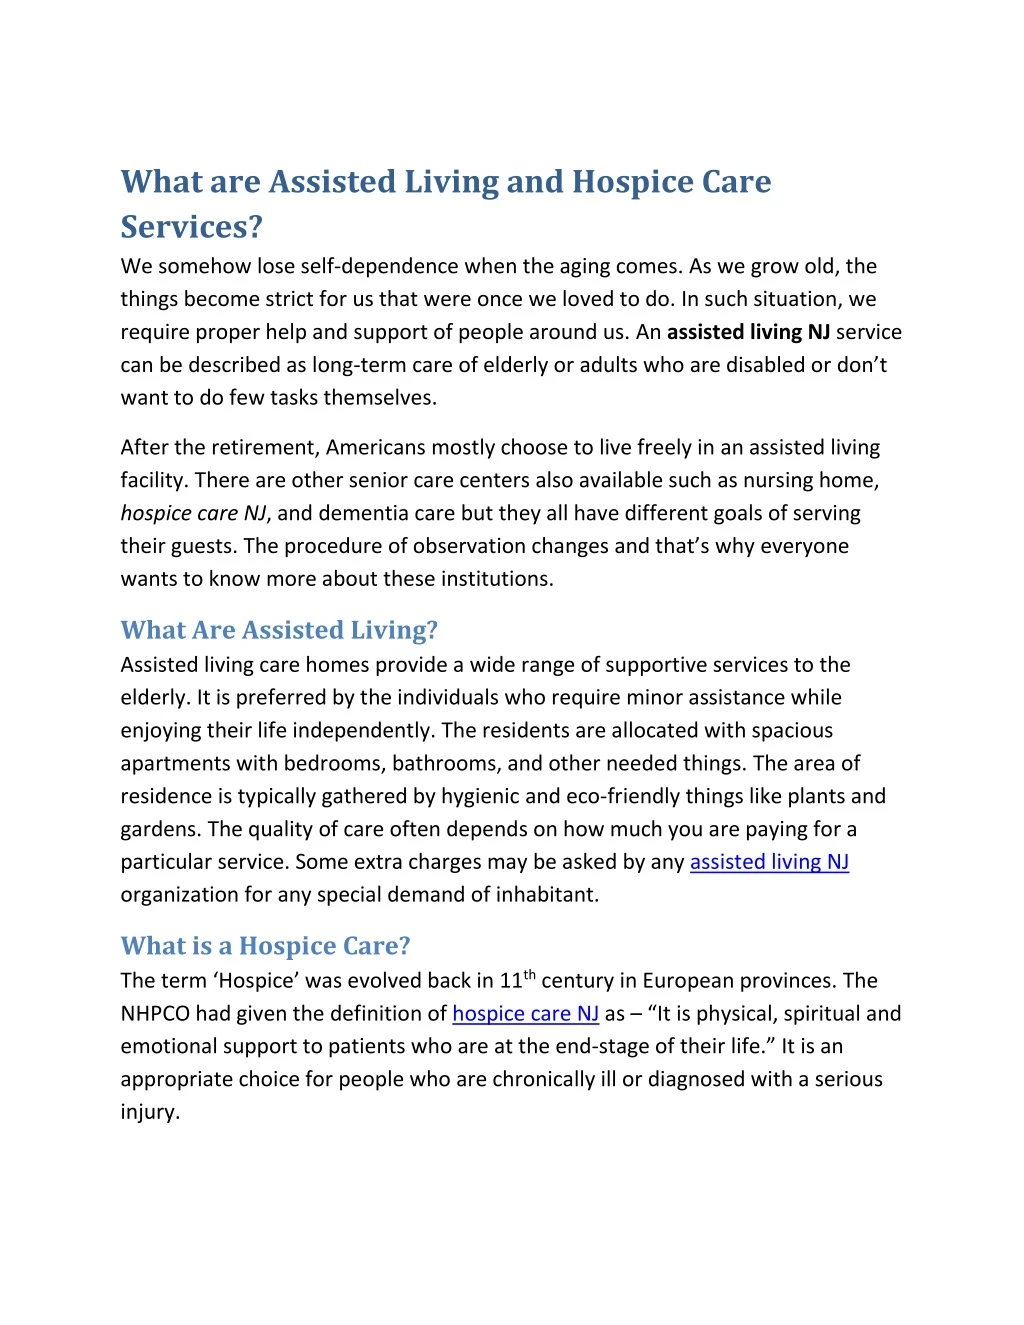 what are assisted living and hospice care